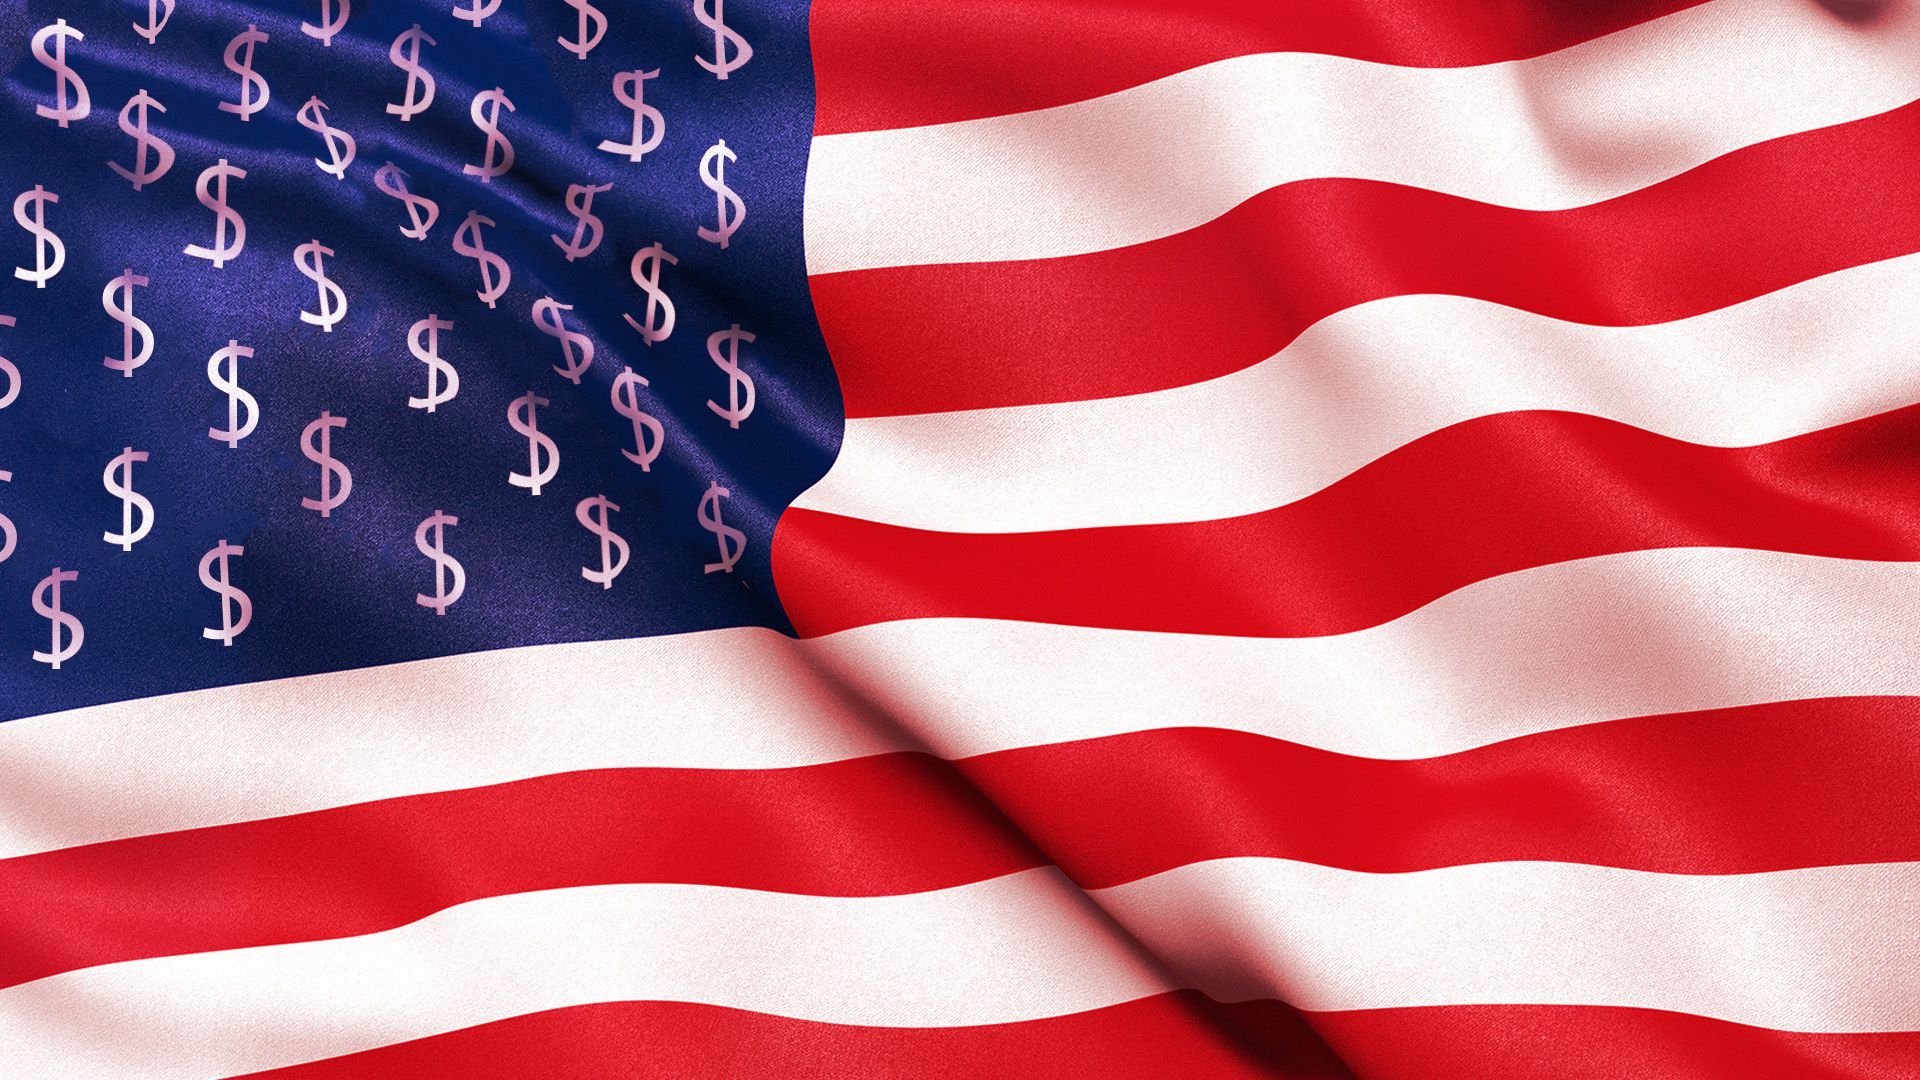 Illustration of the United States flag with the stars replaced by dollar signs